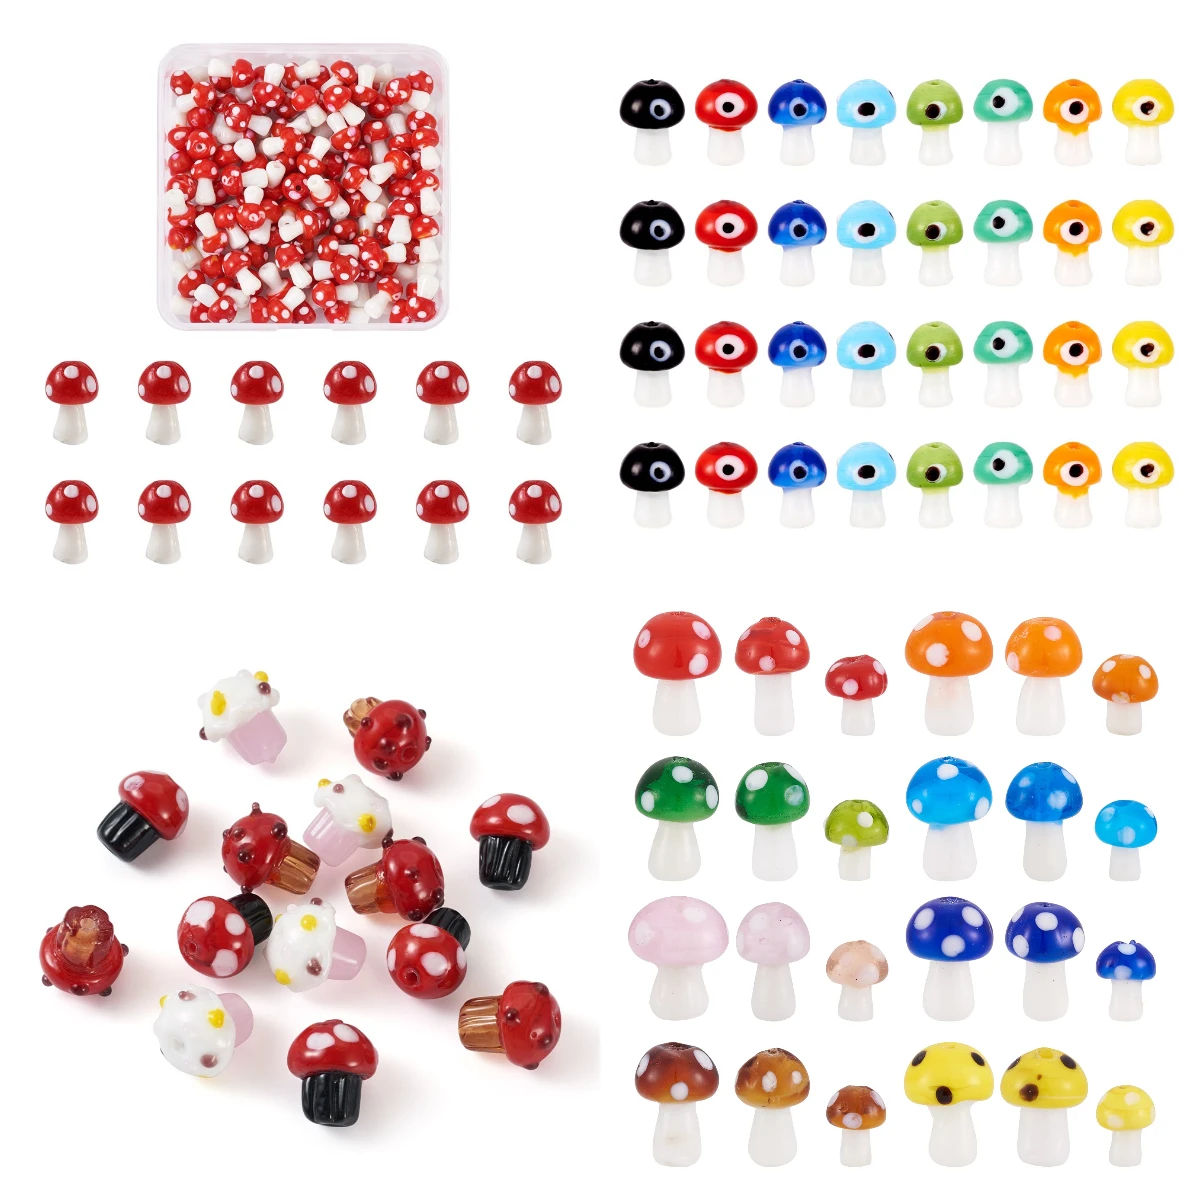 

18-100pcs Lampwork Mushroom Beads Colourful Loose Spacer Beads for Bracelet Necklace Earrings DIY Jewelry Making Accessories